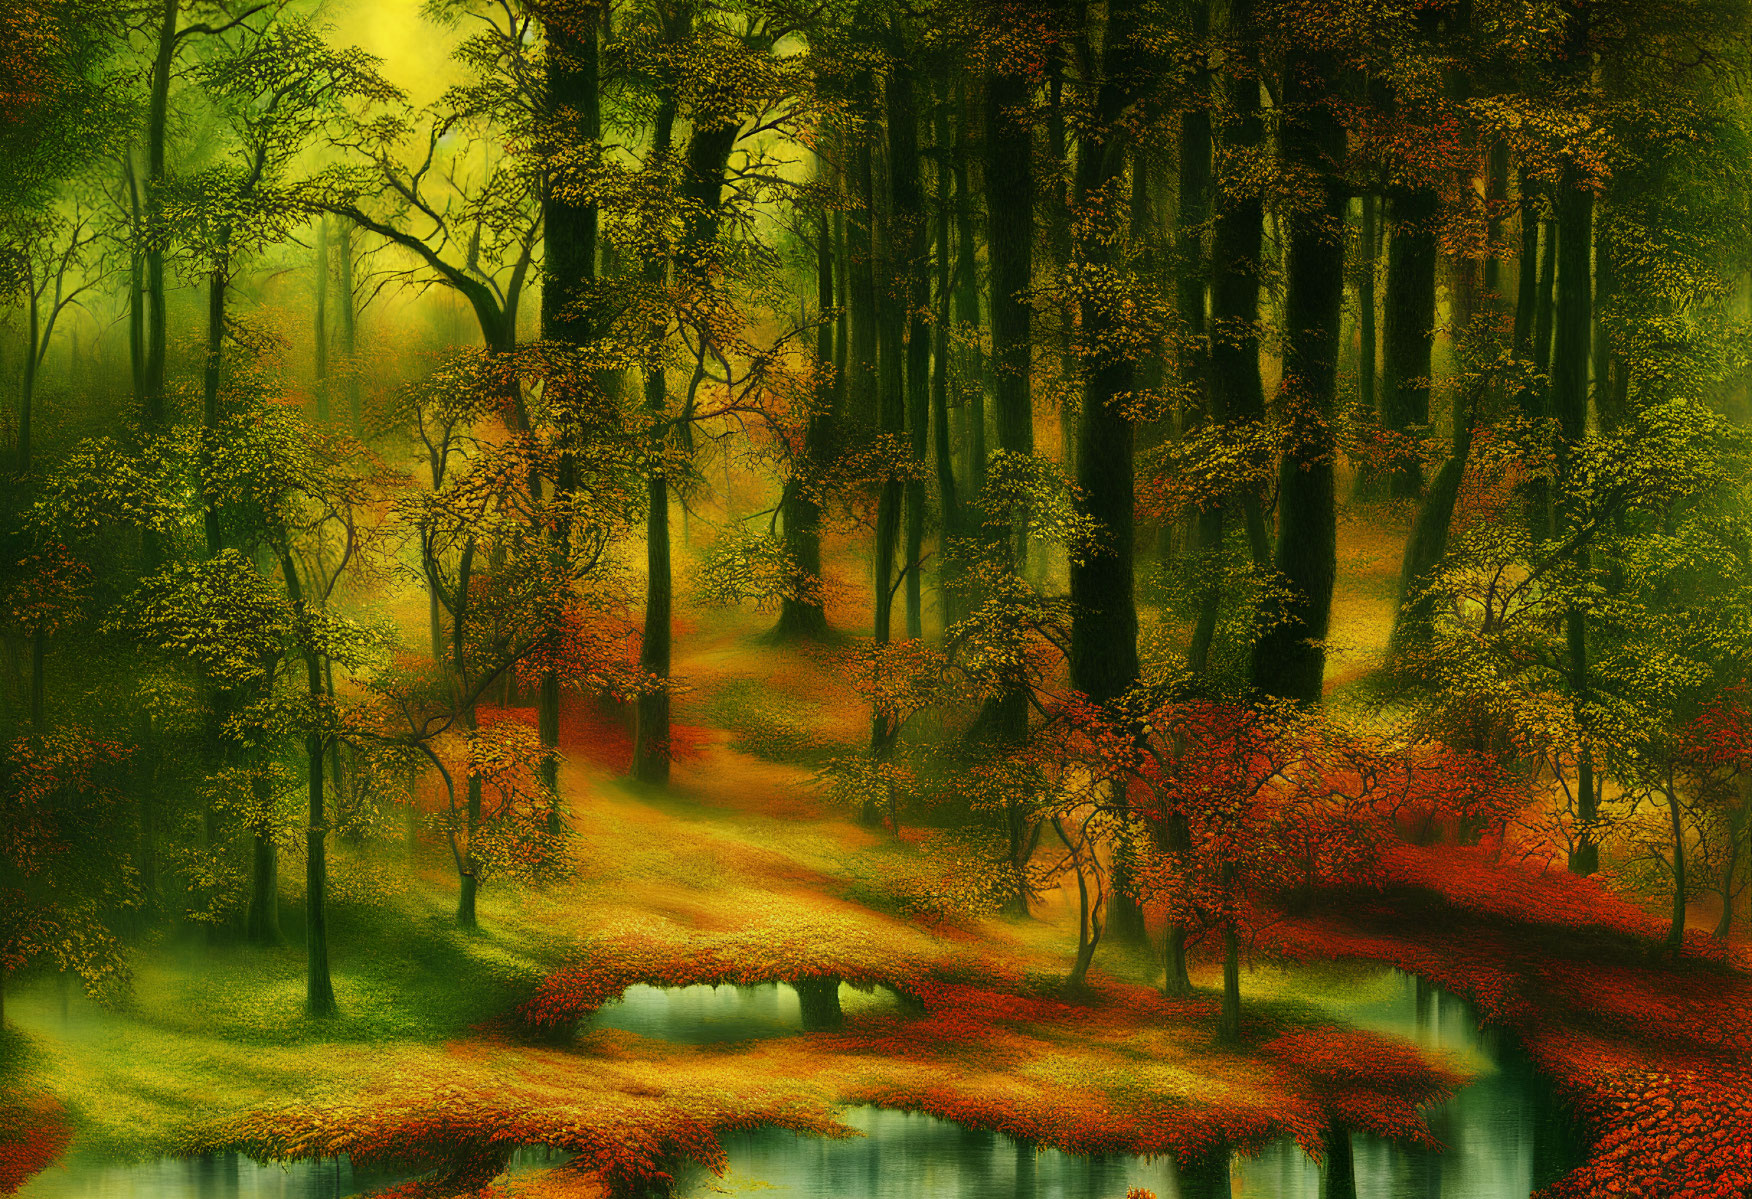 Colorful Autumn Forest Scene with Pond and Sunlight